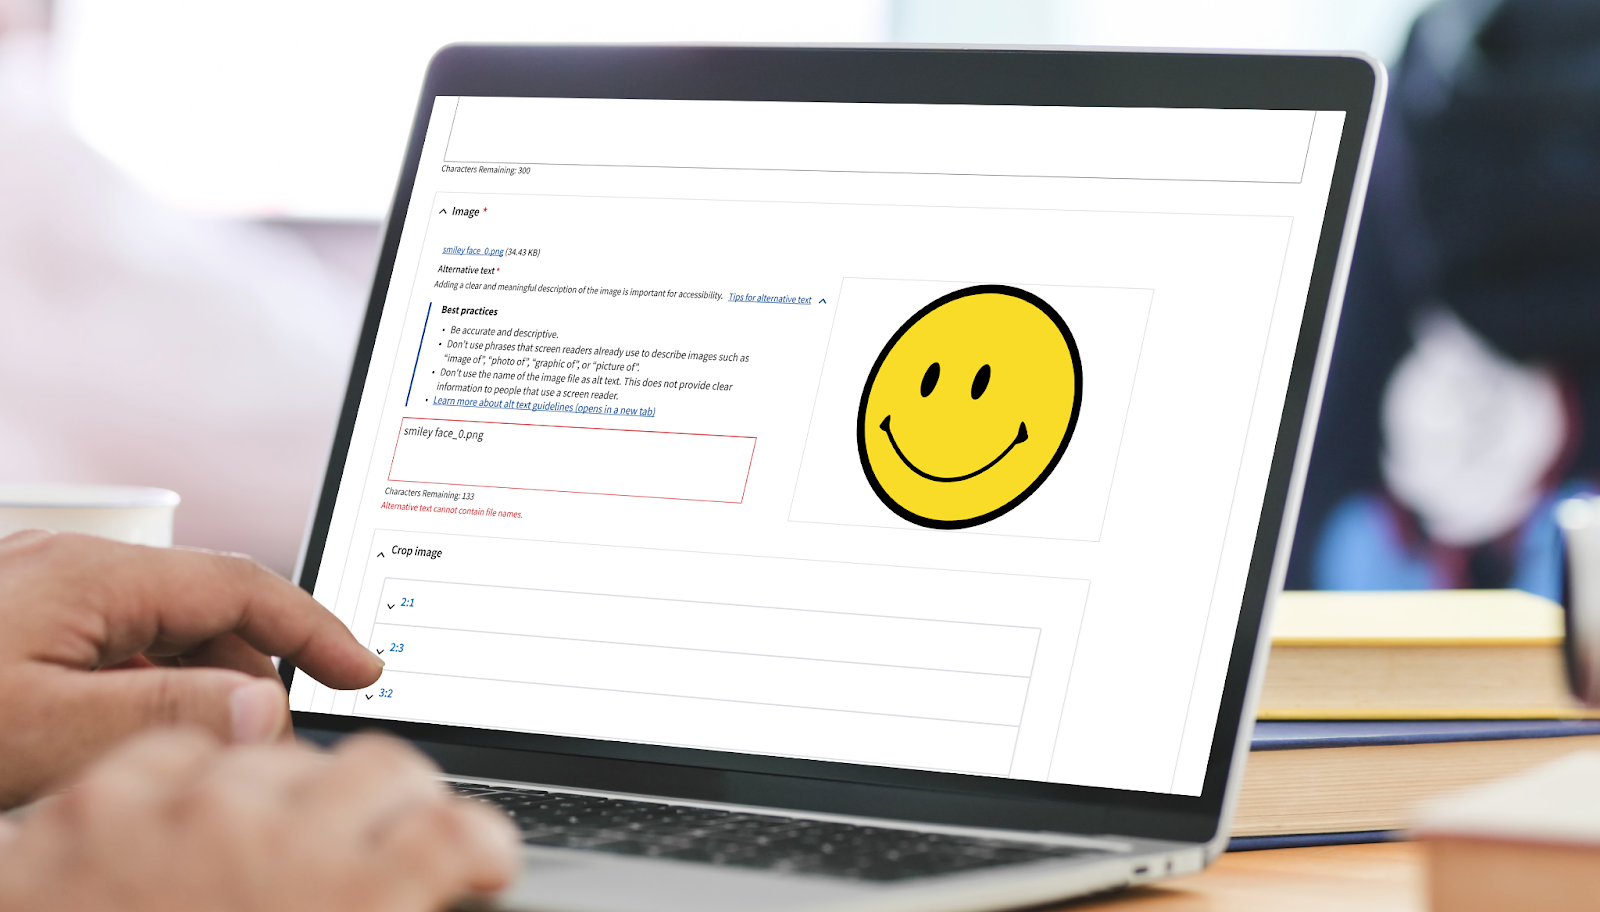 An image of a smiley face is displayed to show an example of inputting alt text on a VA website